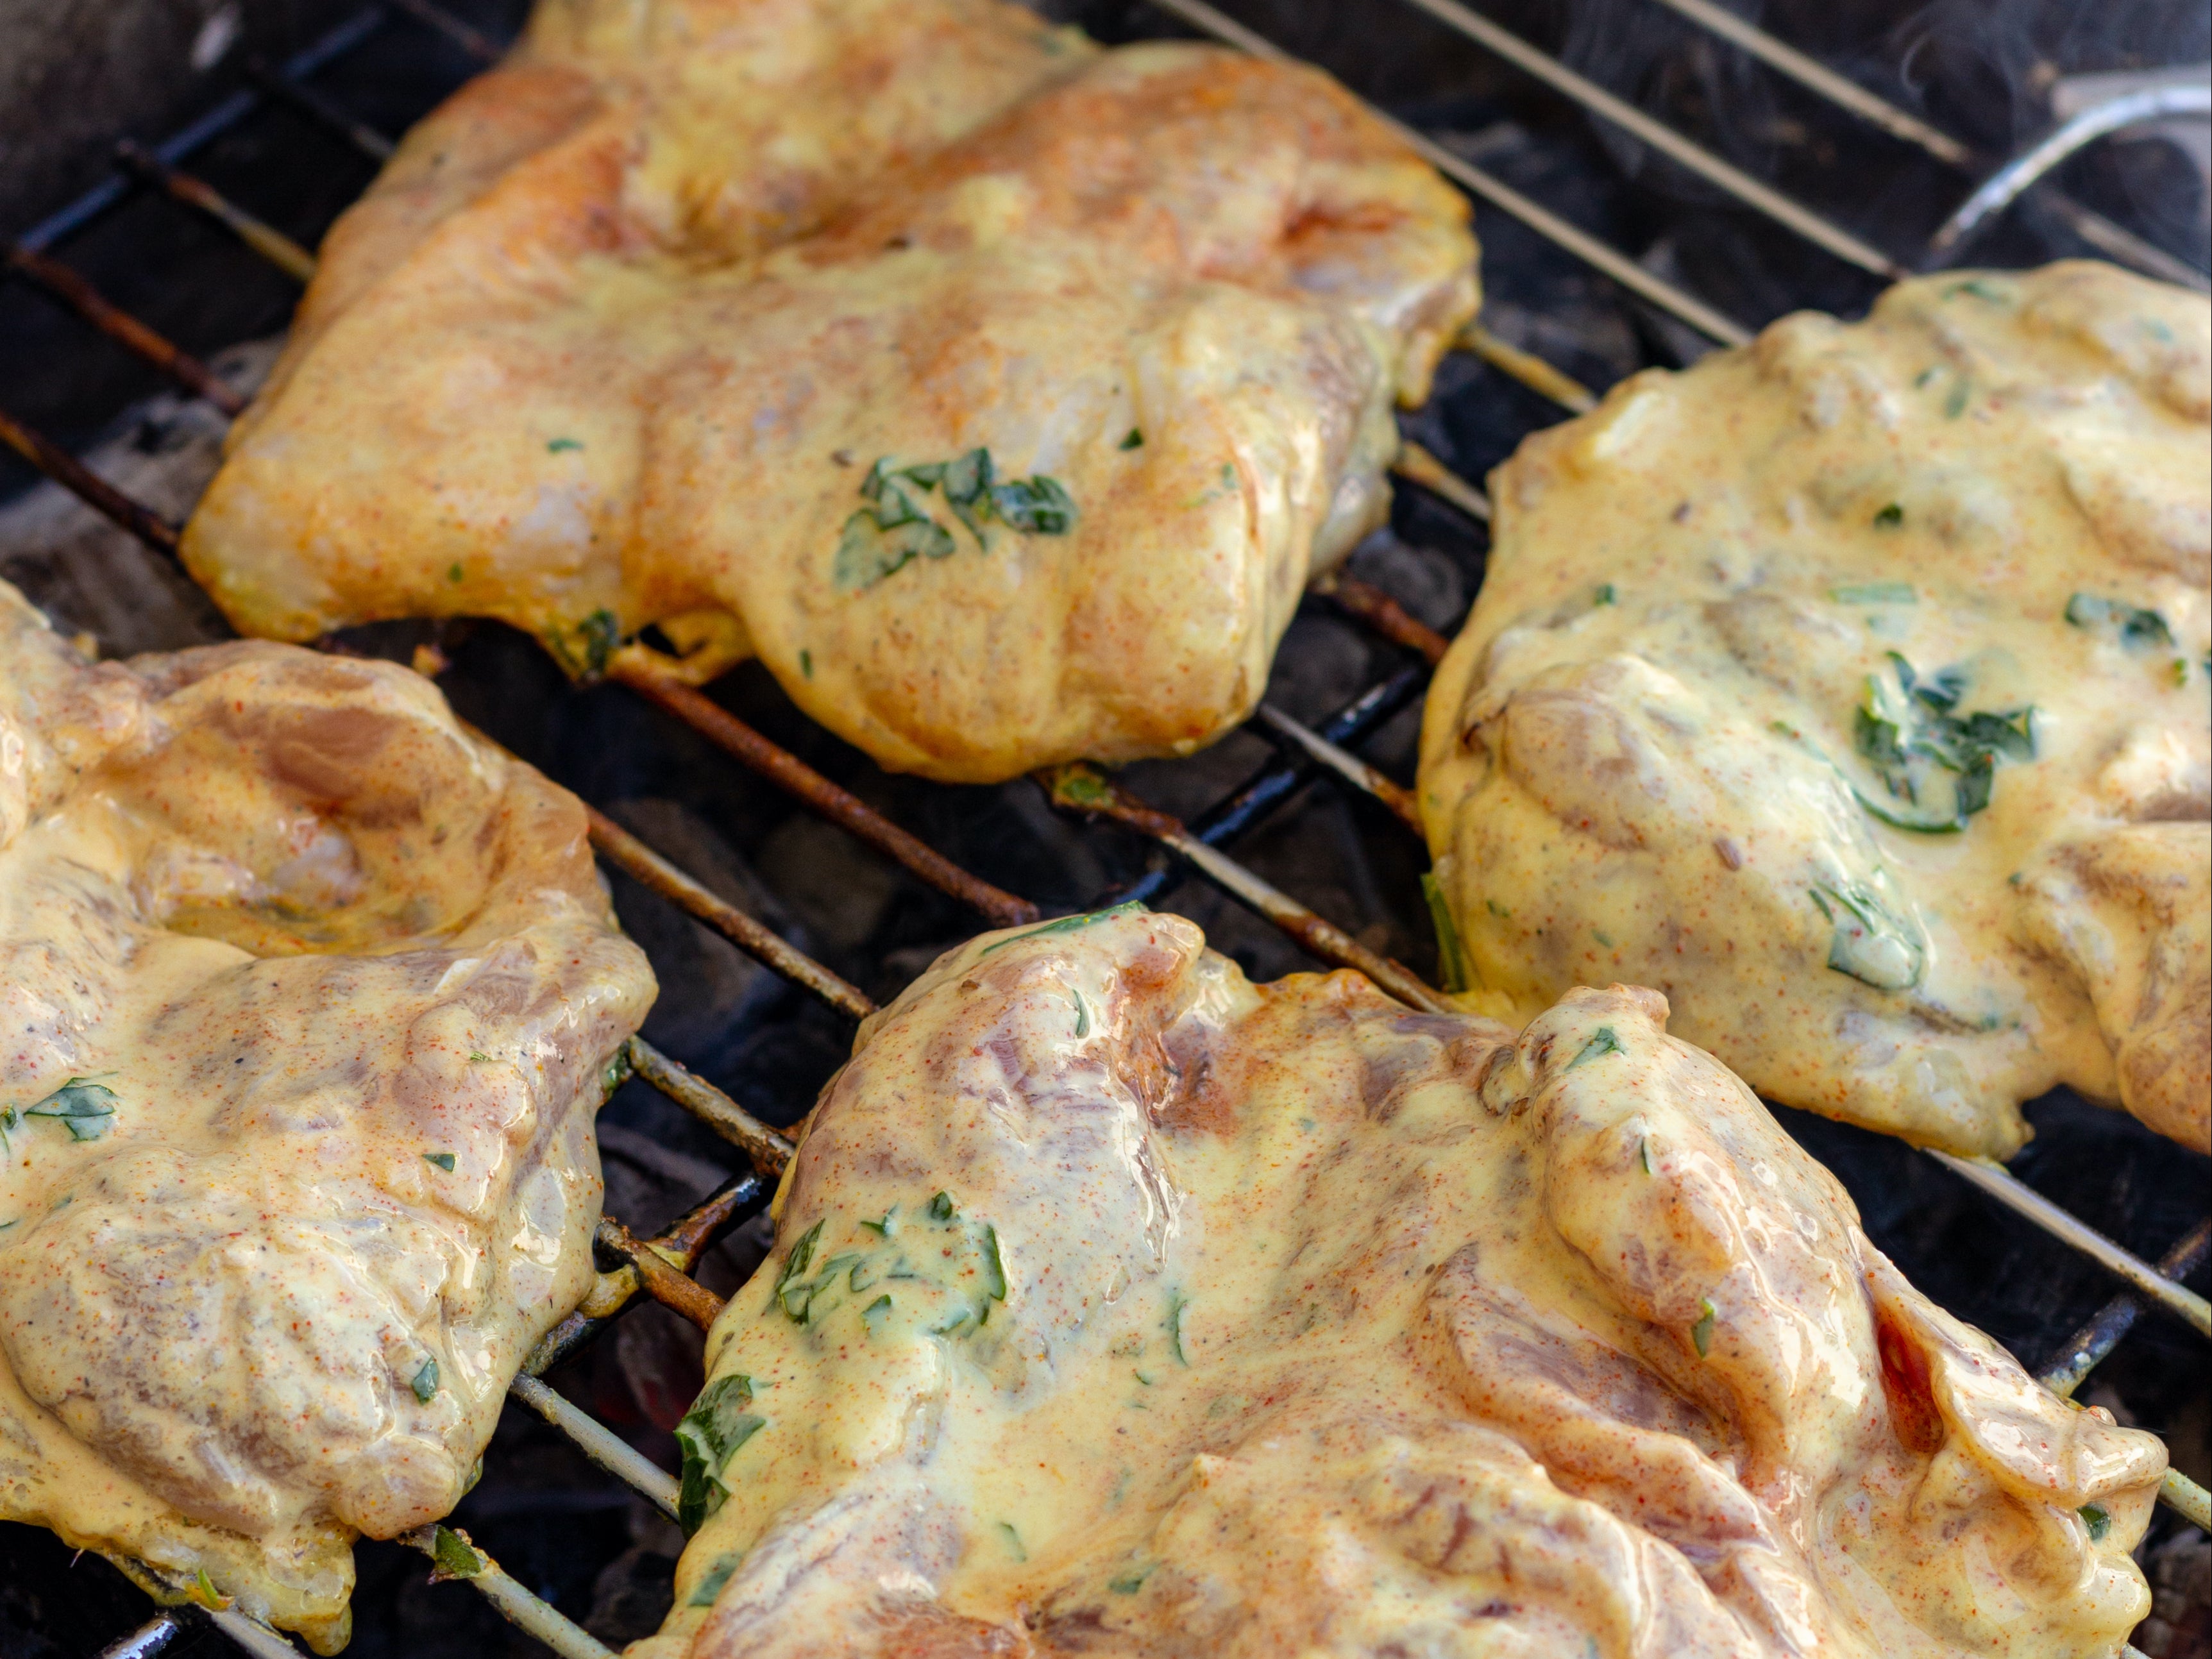 Boneless skinless chicken thighs are a reliable choice when it comes to grilling chicken